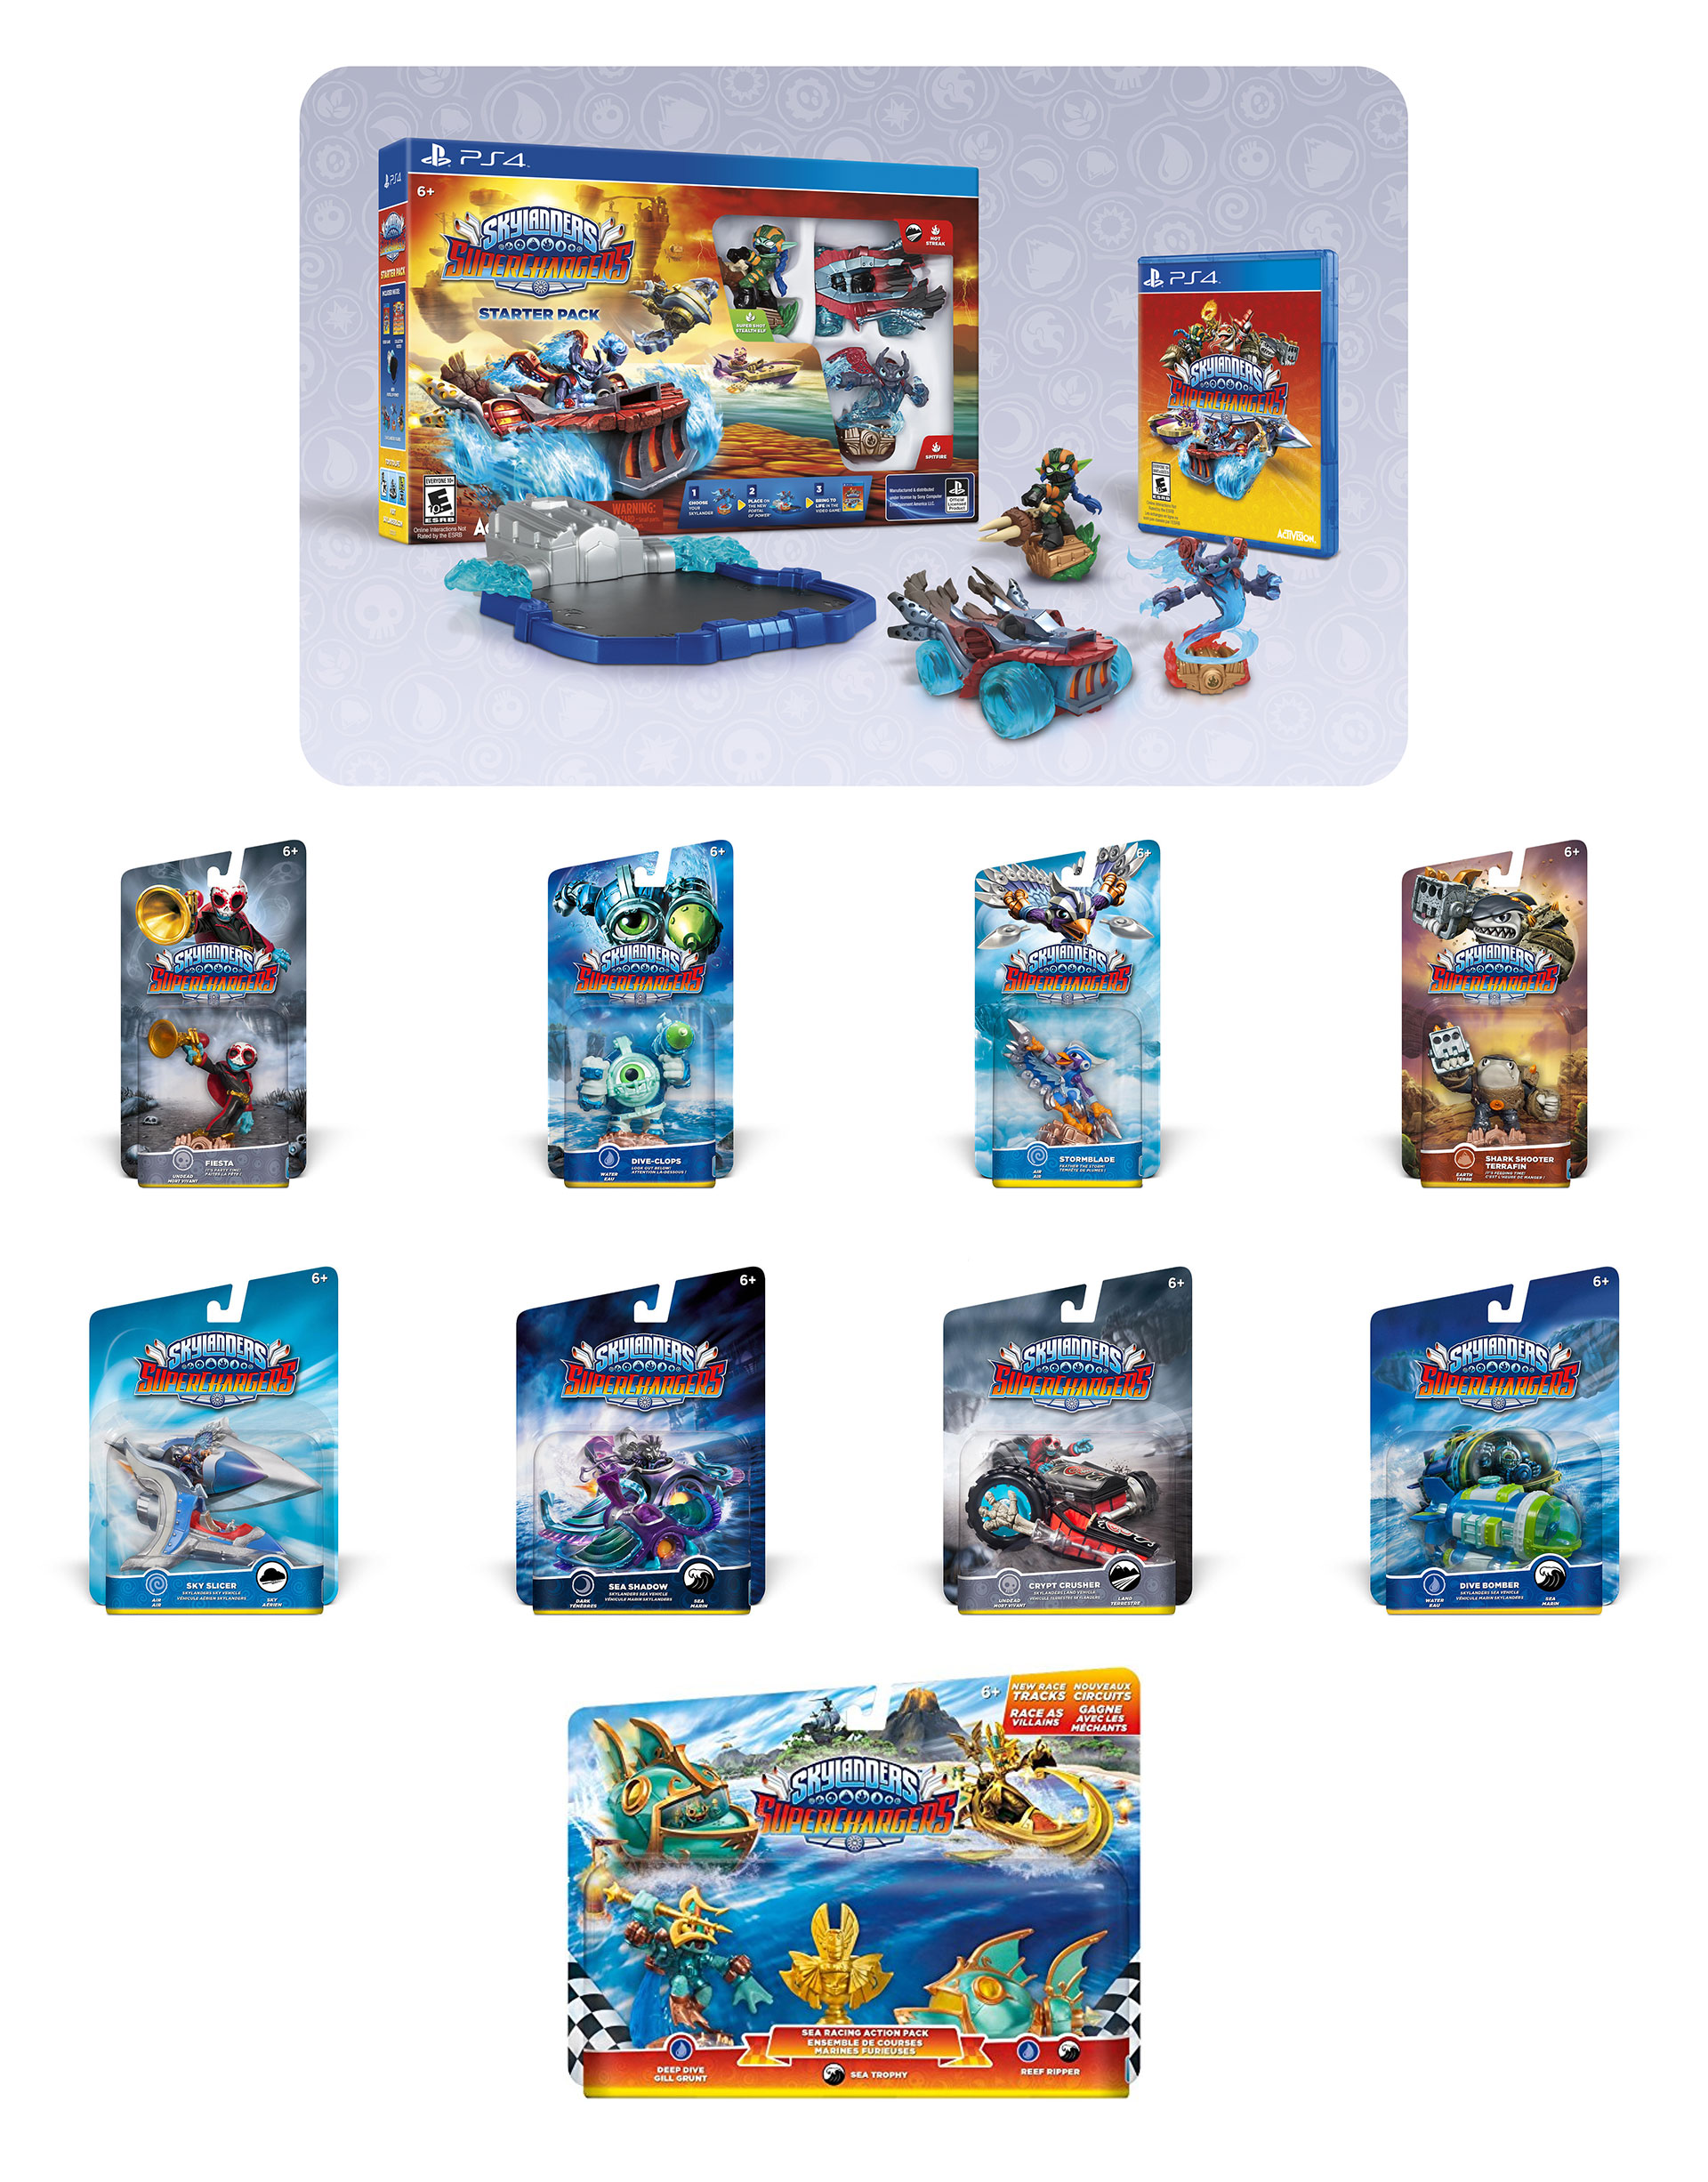 A Skylanders Superchargers Buyer’s Guide For Confused Parents